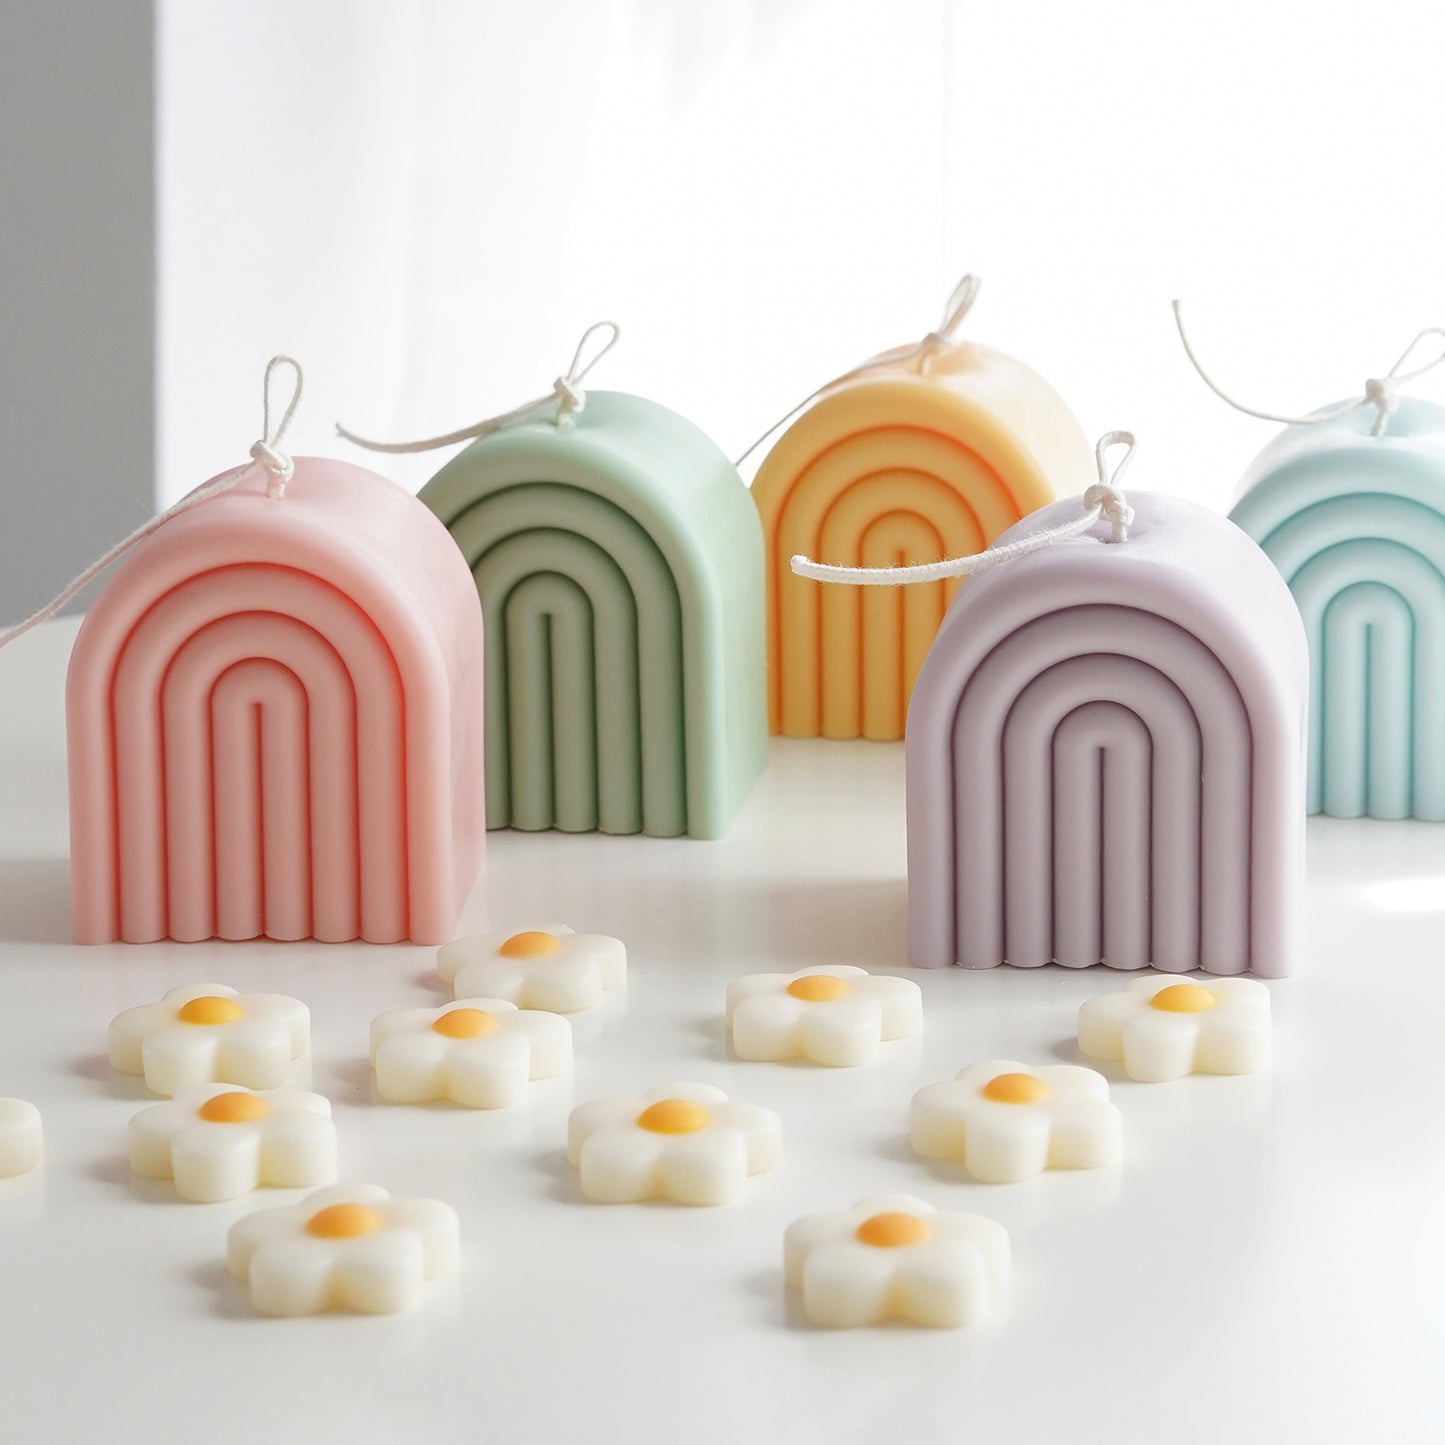 aqua blue, blush pink, lavender, sage green, and tangerine yellow rainbow shape arch pastel color soy pillar candles with long wicks and daisy wax melts on white round table